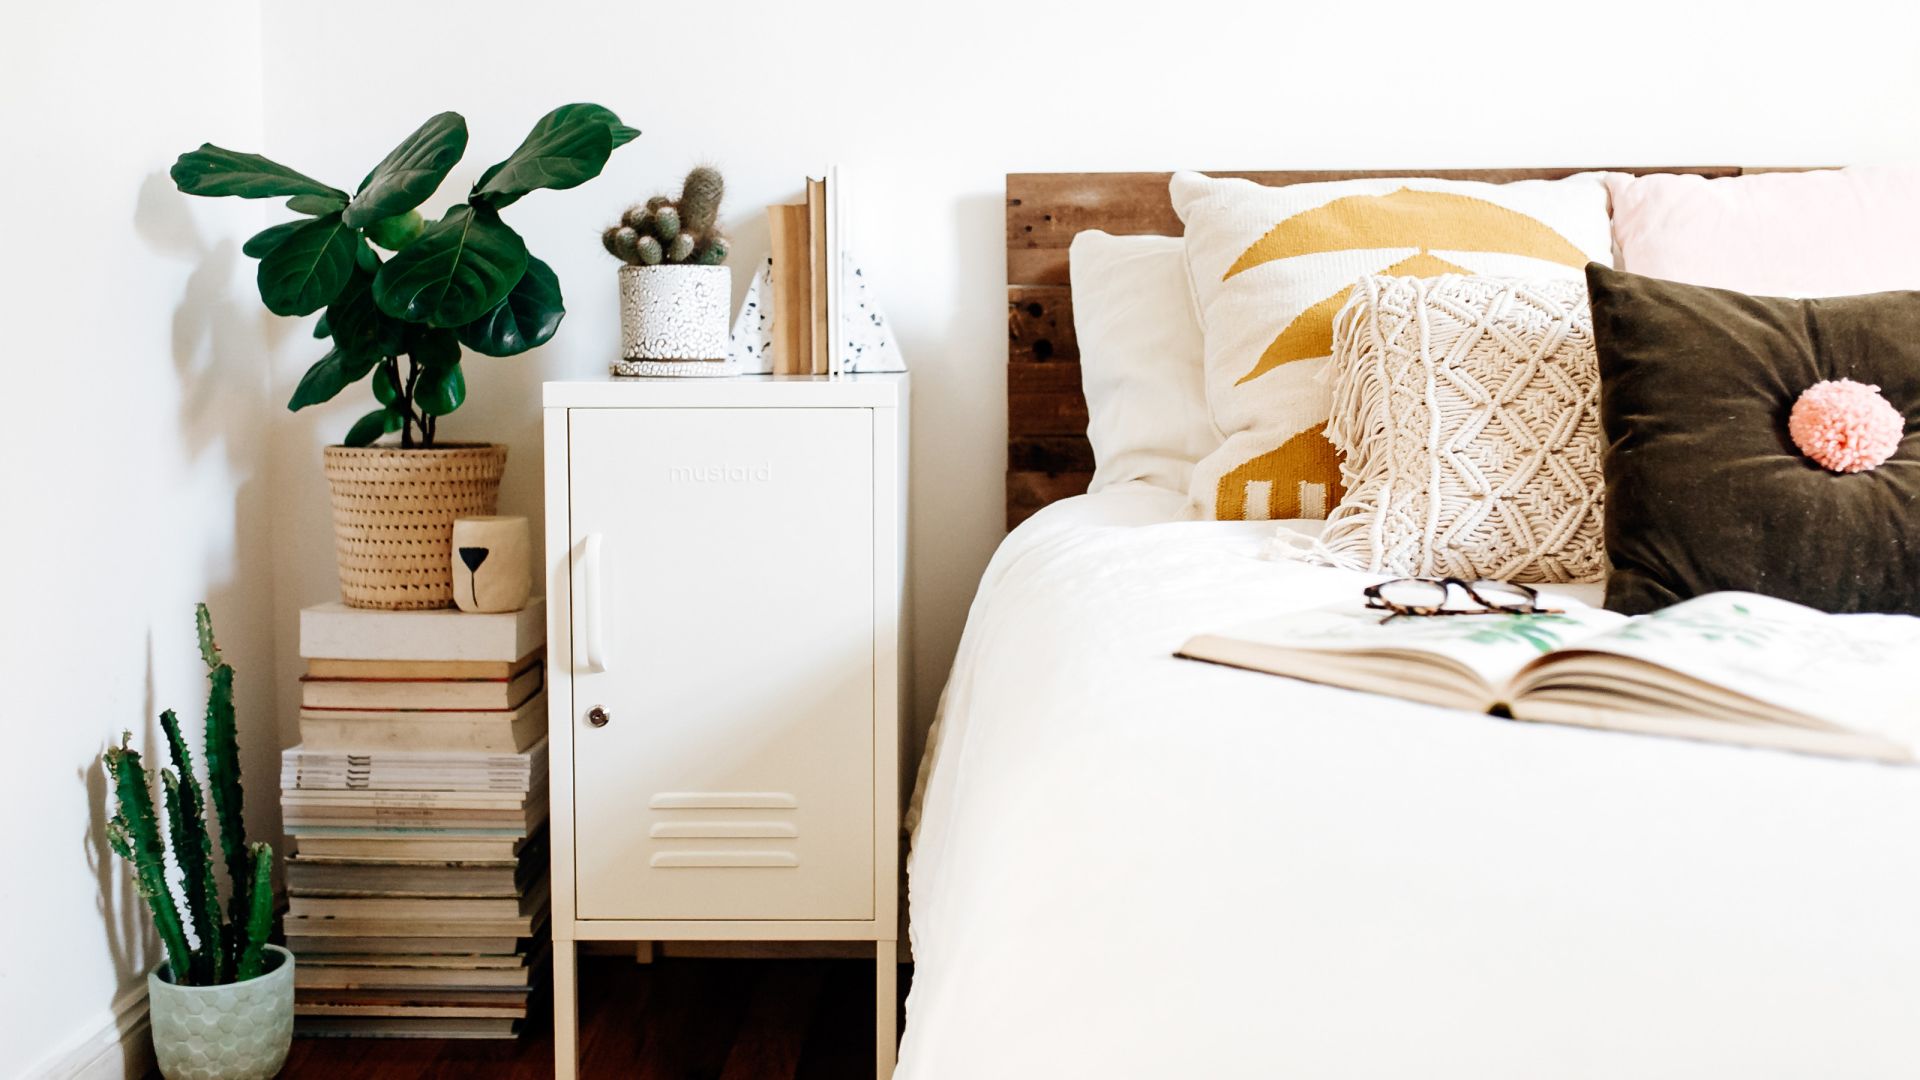 16 winning bedroom storage ideas to organize and declutter your space